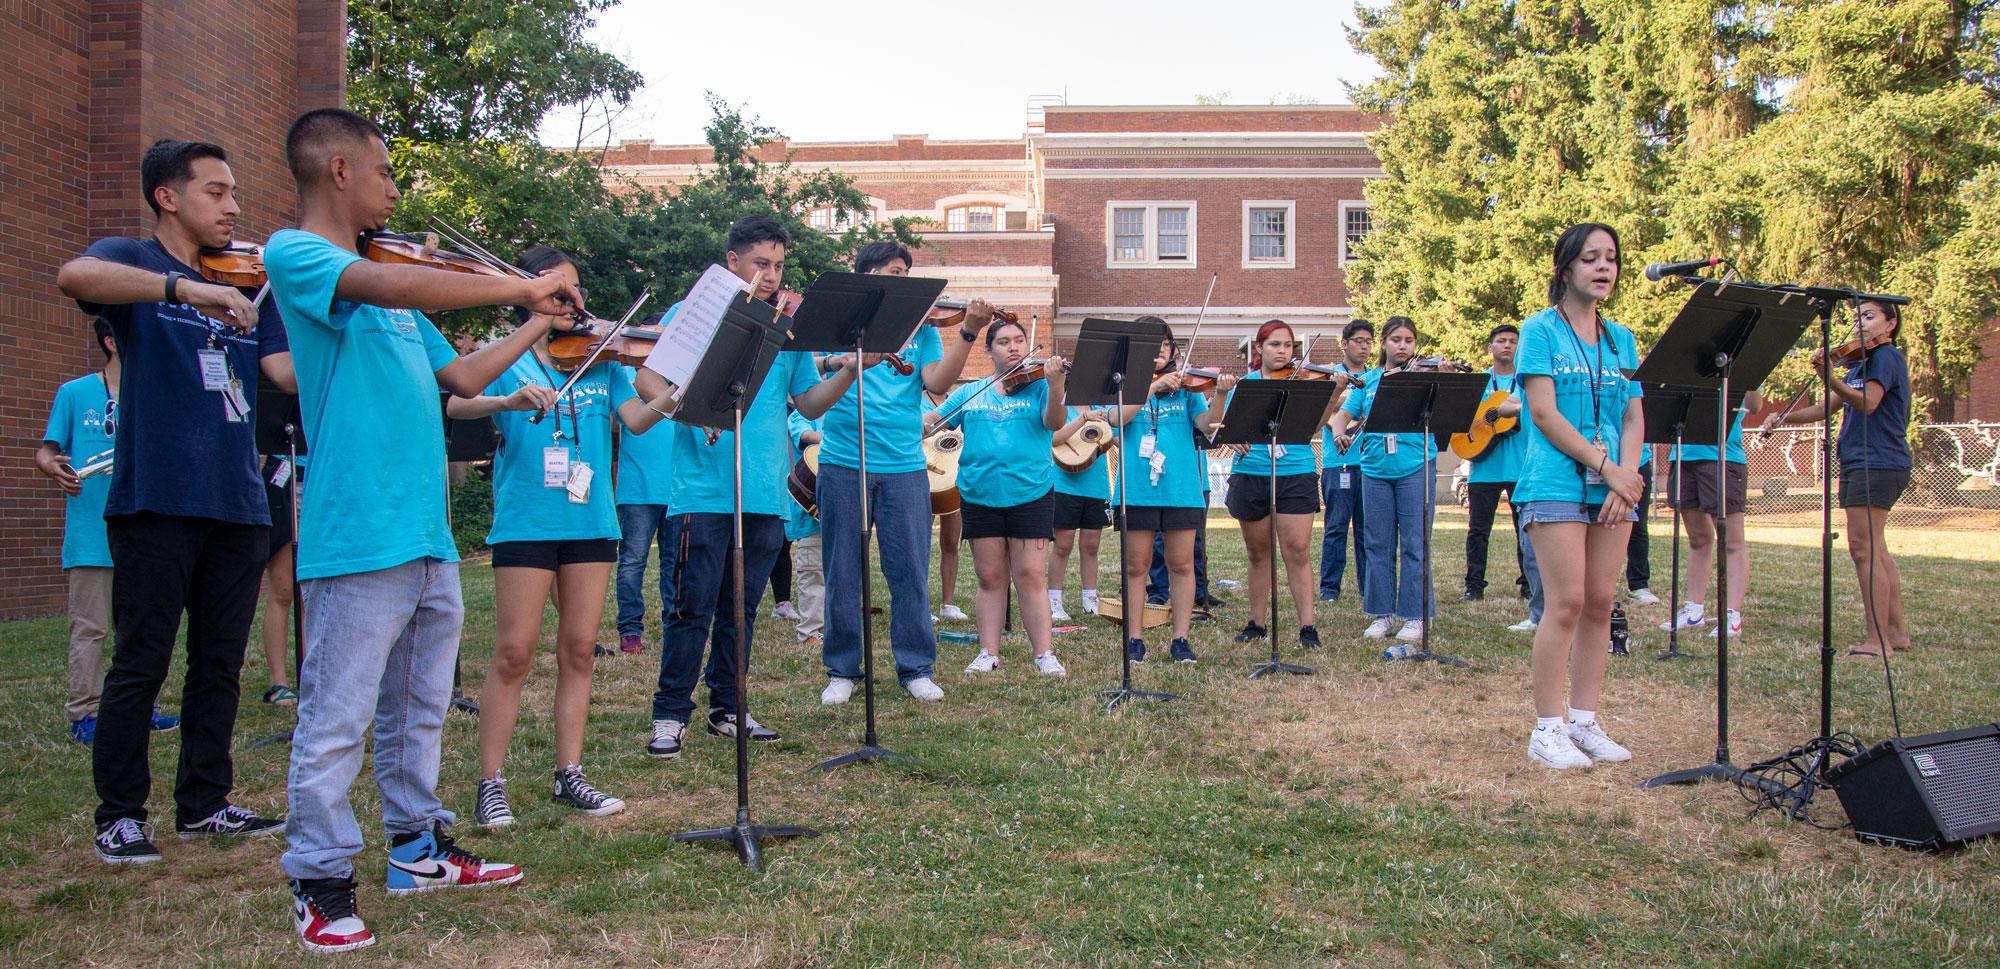 Teenagers wearing blue shirts are playing violins, trumpets and acoustic guitars at an outdoor concert.